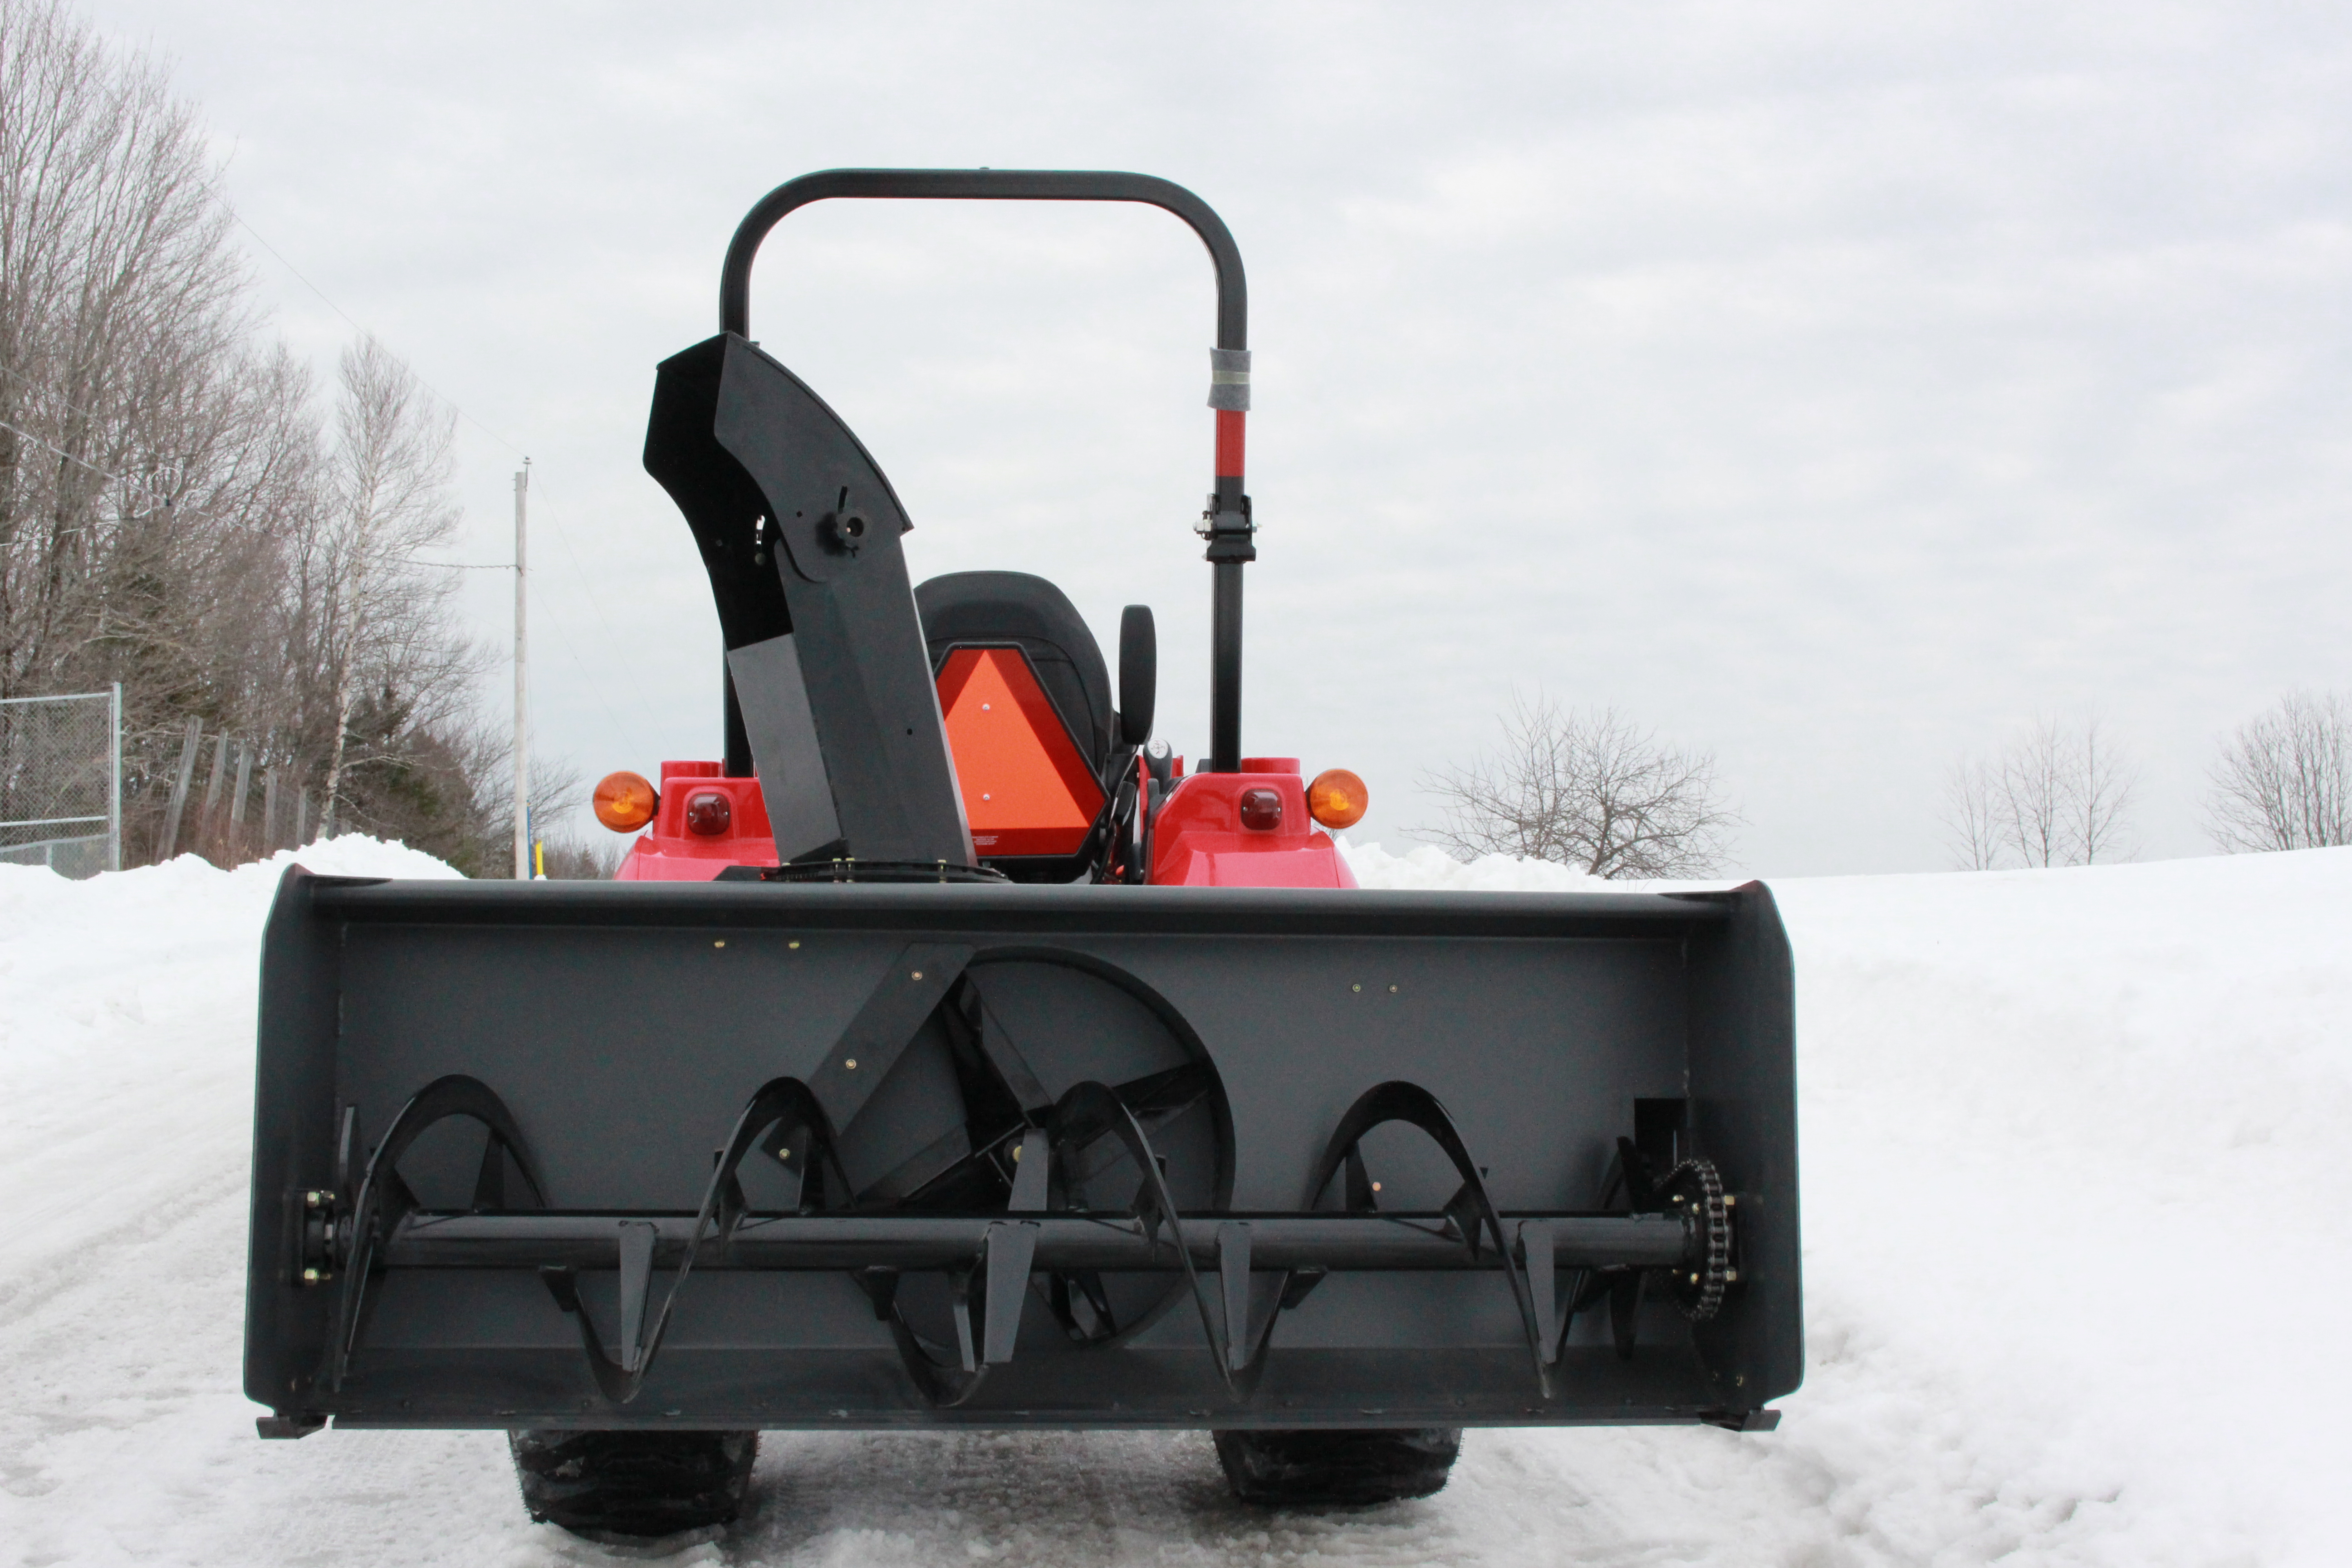 64" 3 Point Hitch Berco Mistral Snowblower